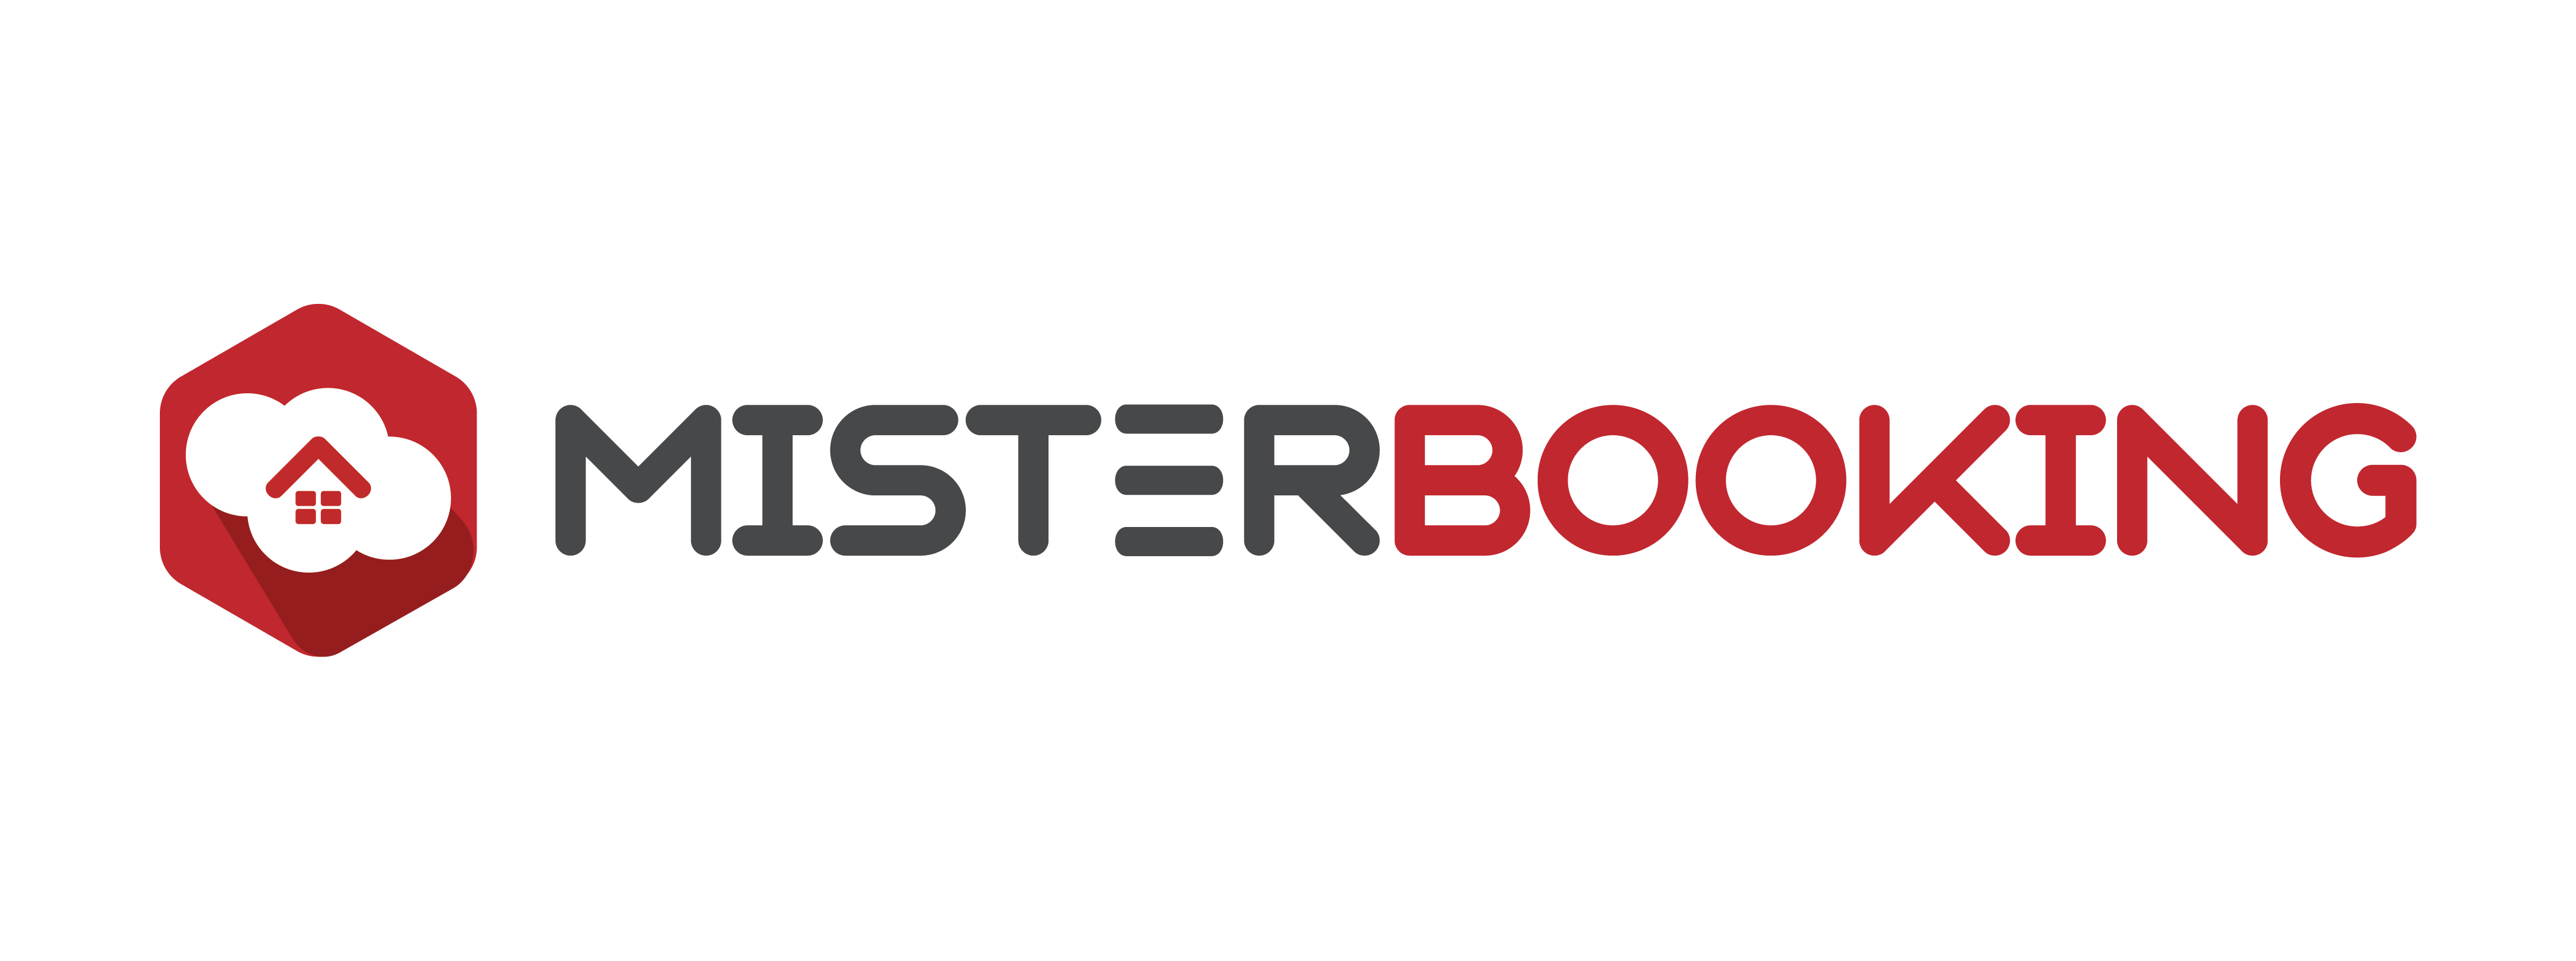 Misterbooking uses TrustYou